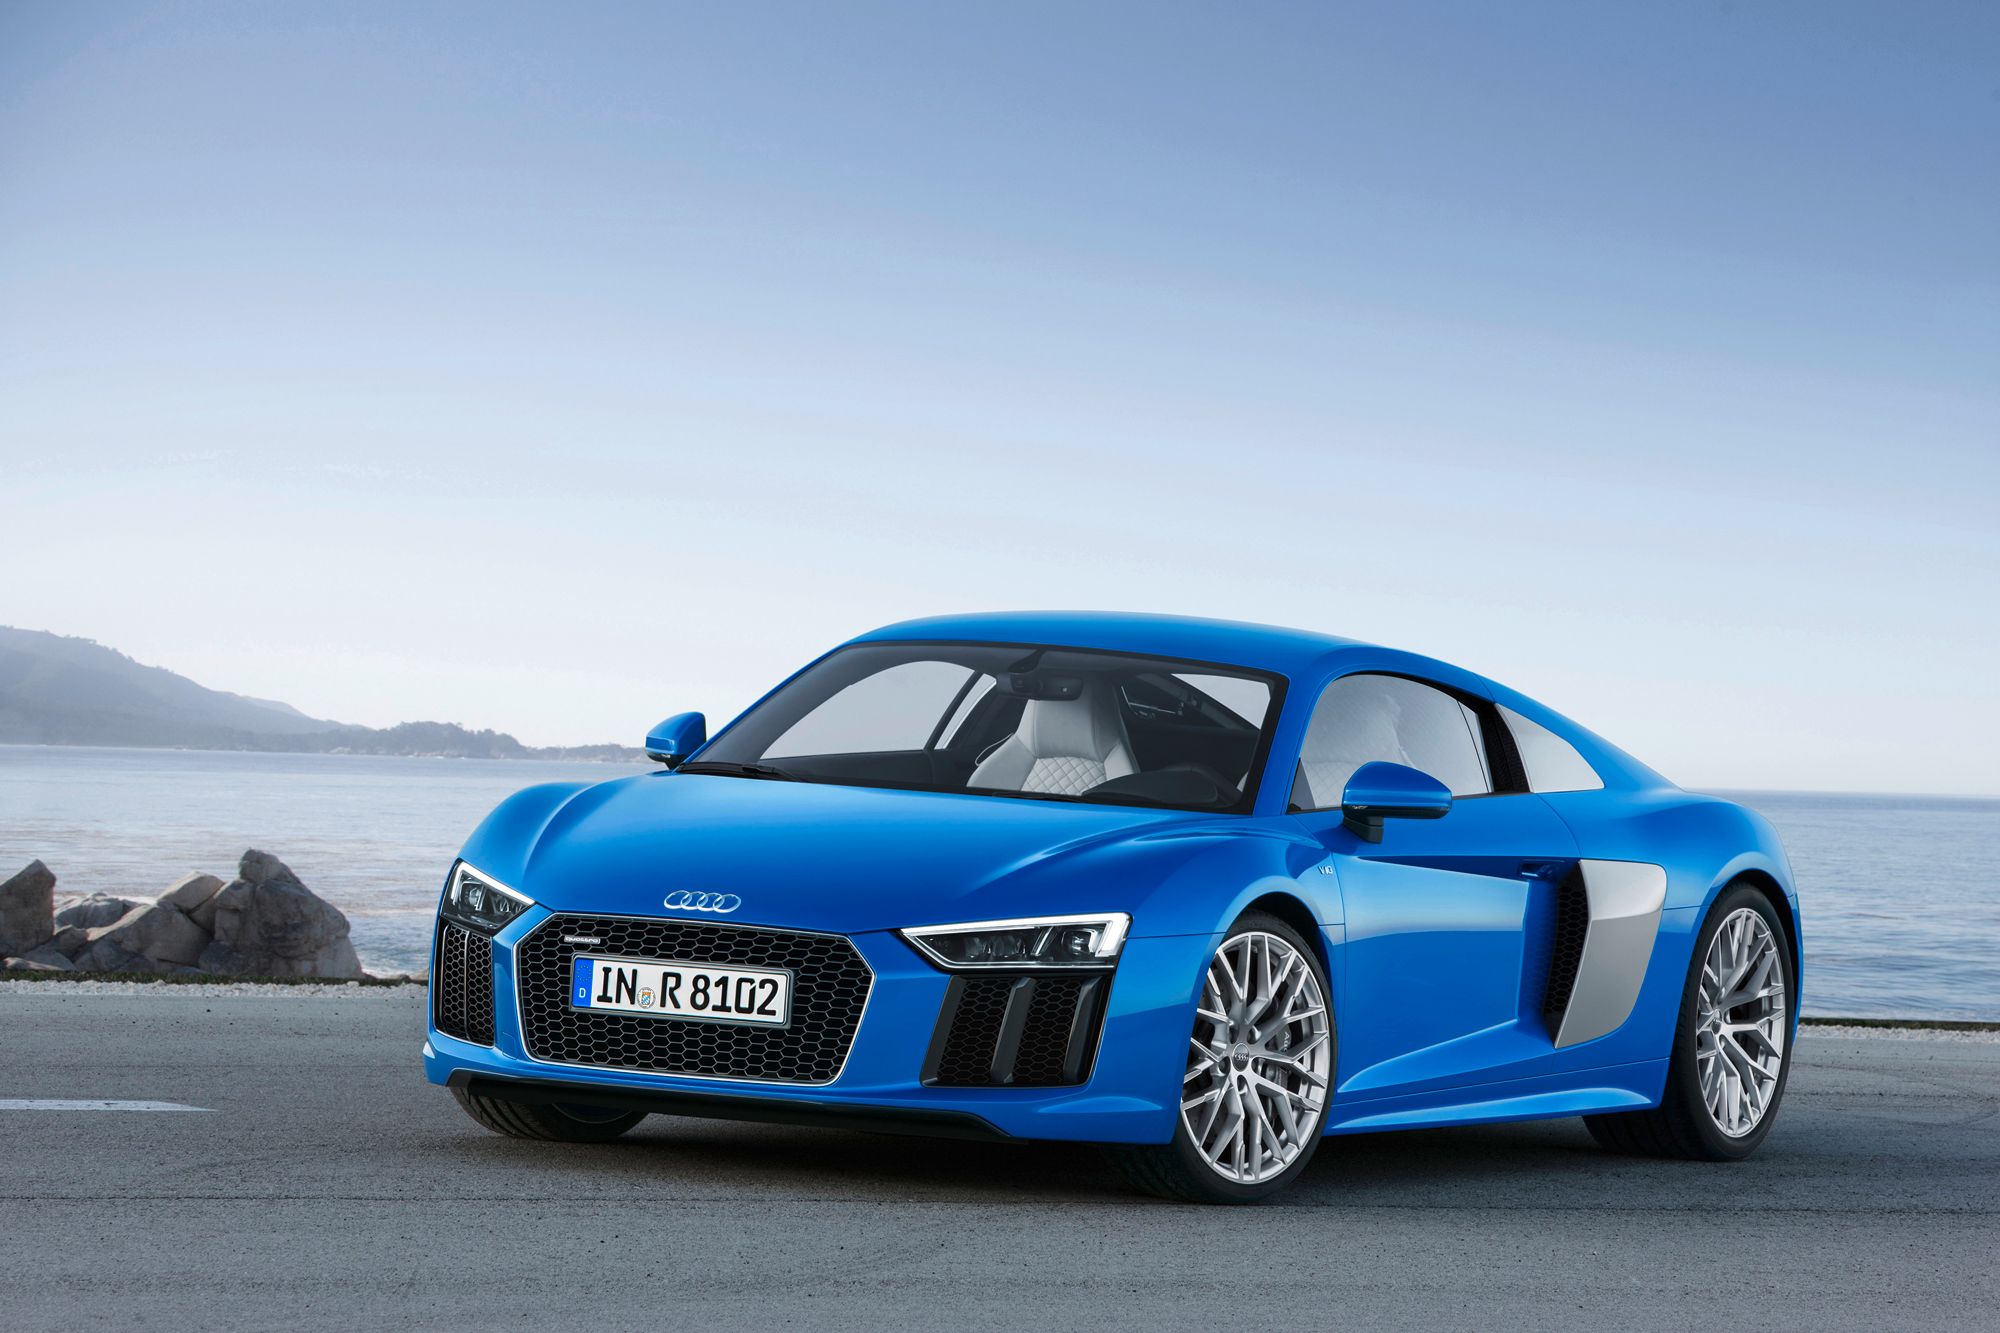 http://static2.therichestimages.com/cdn/1000/666/90/cw/wp-content/uploads/2015/04/2016-Audi-R81.jpg